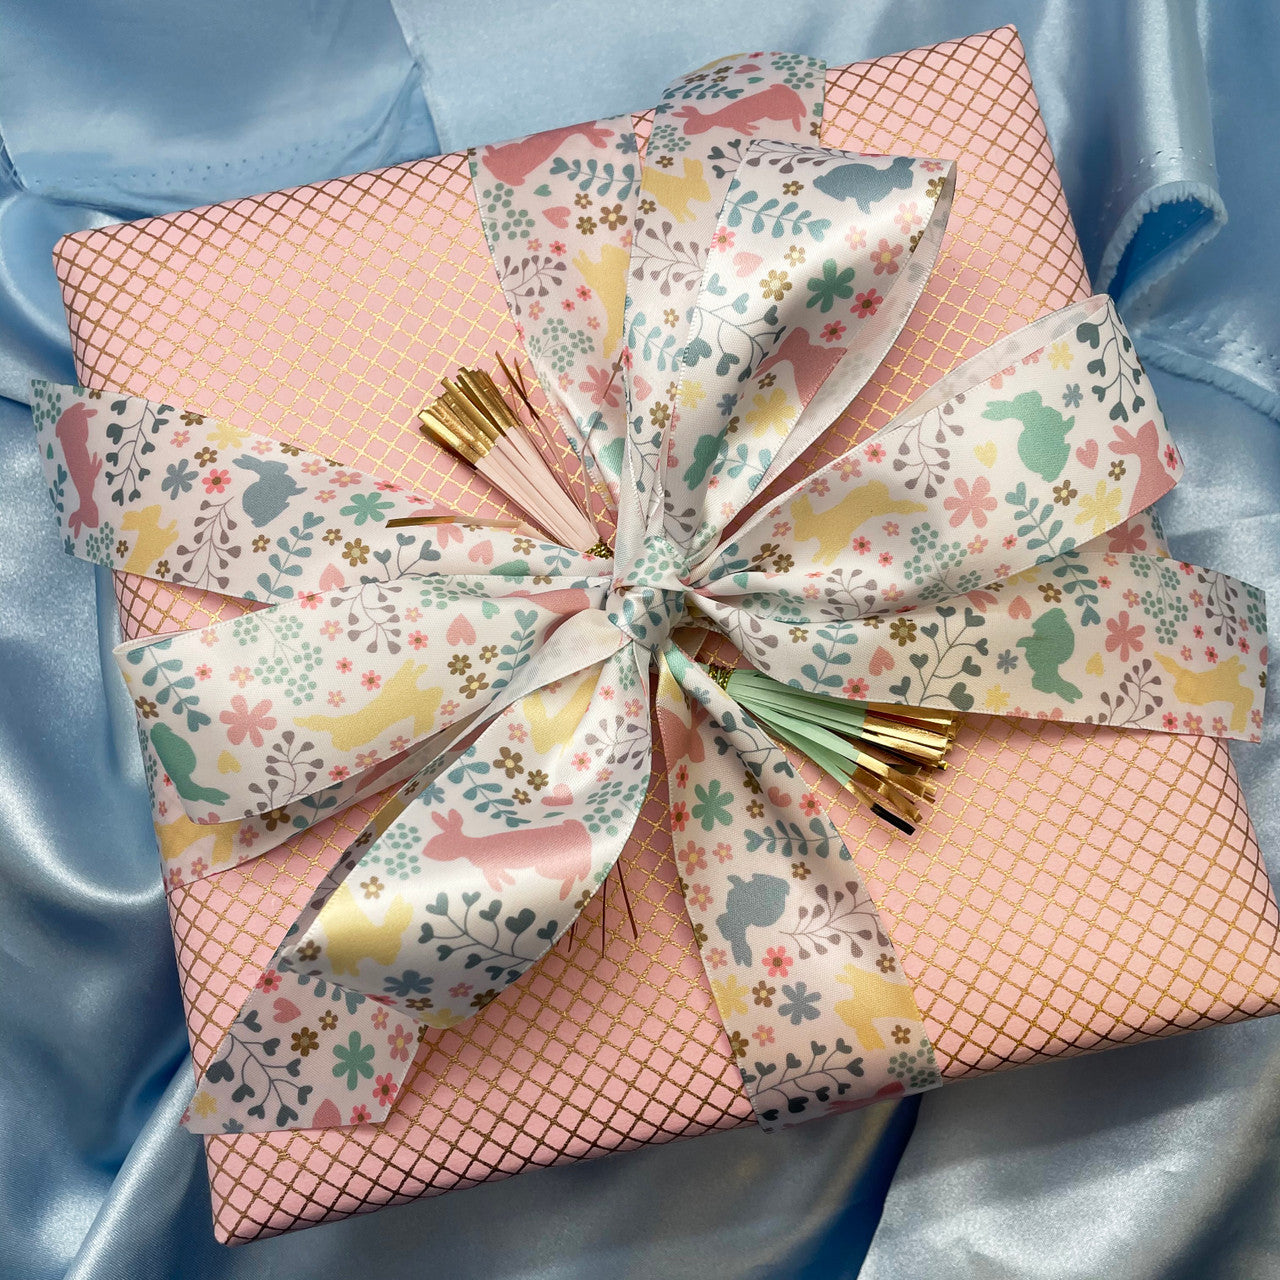 An elegant easter gift tied with our beautiful pastel bunnies. Any Easter brunch hostess would love this special gift!